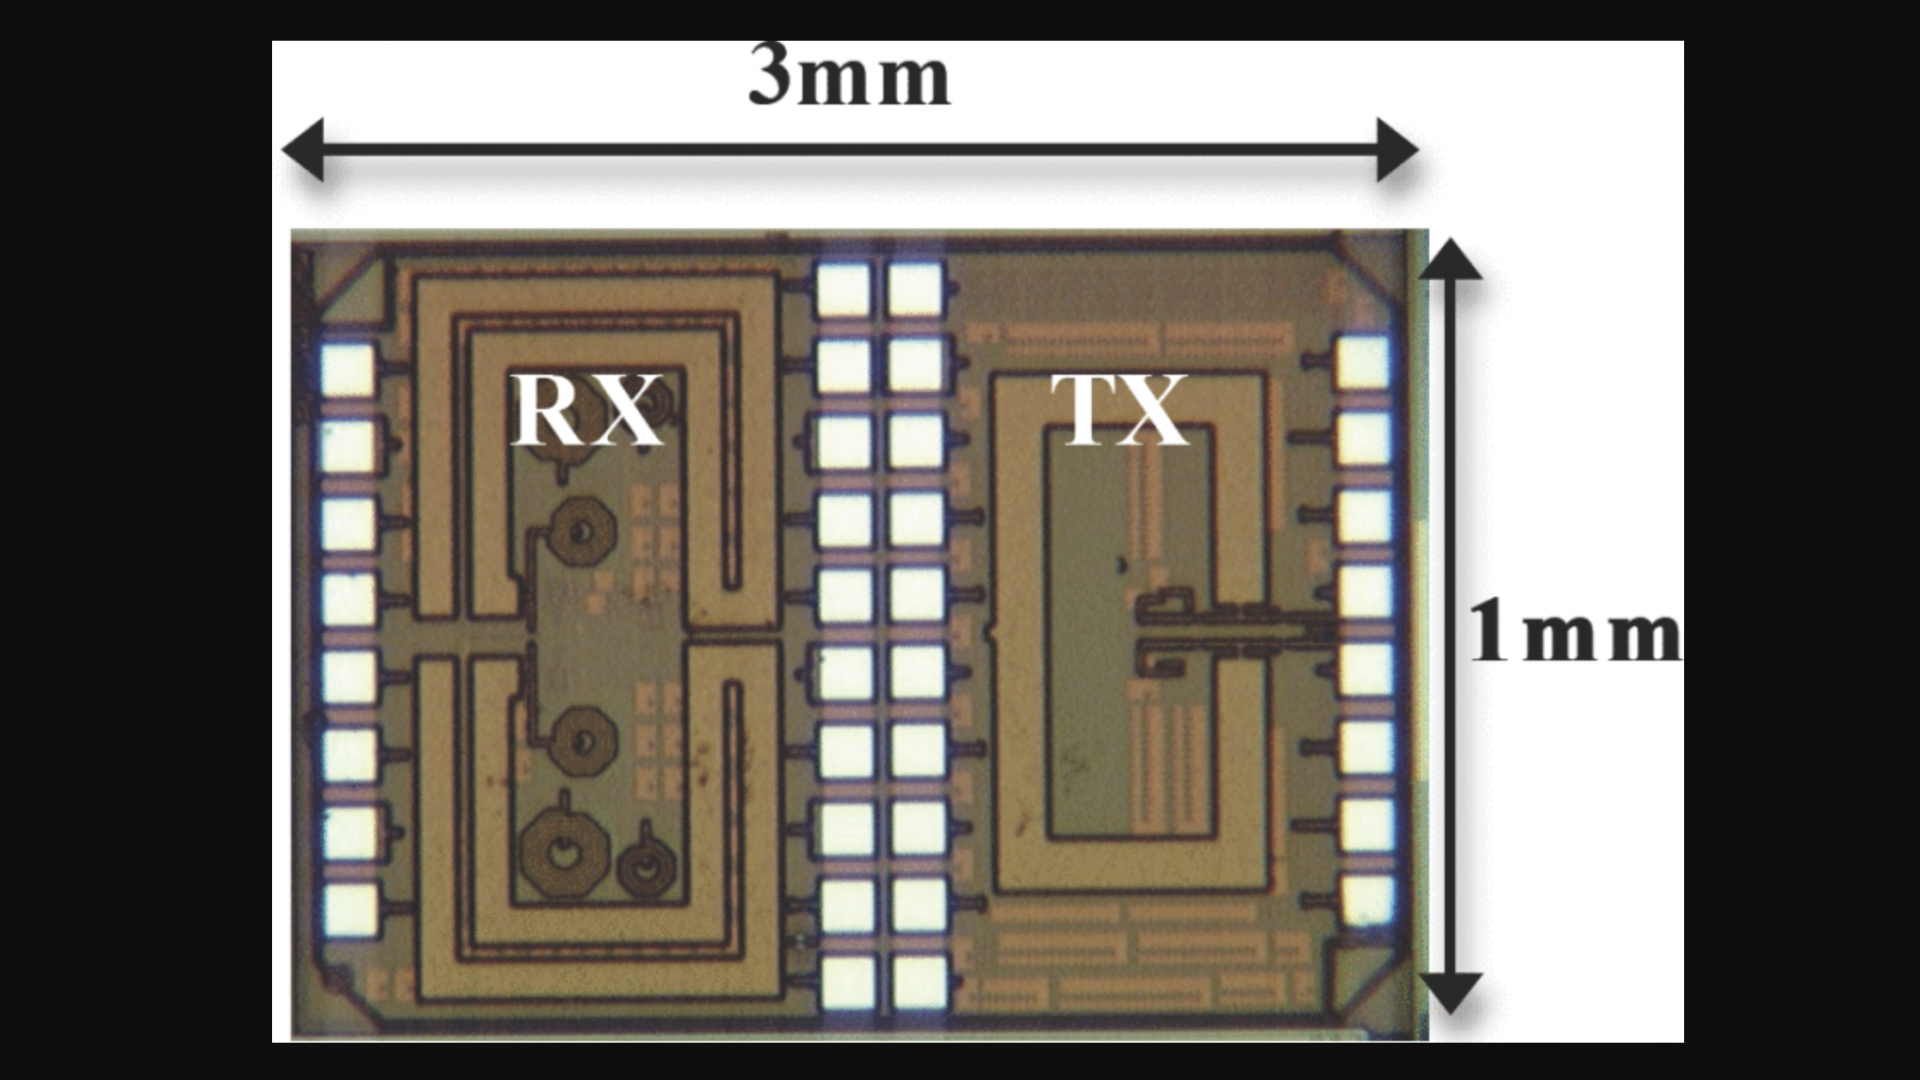 Co-design of on-chip antennas and circuits for a UNII band monolithic transceiver